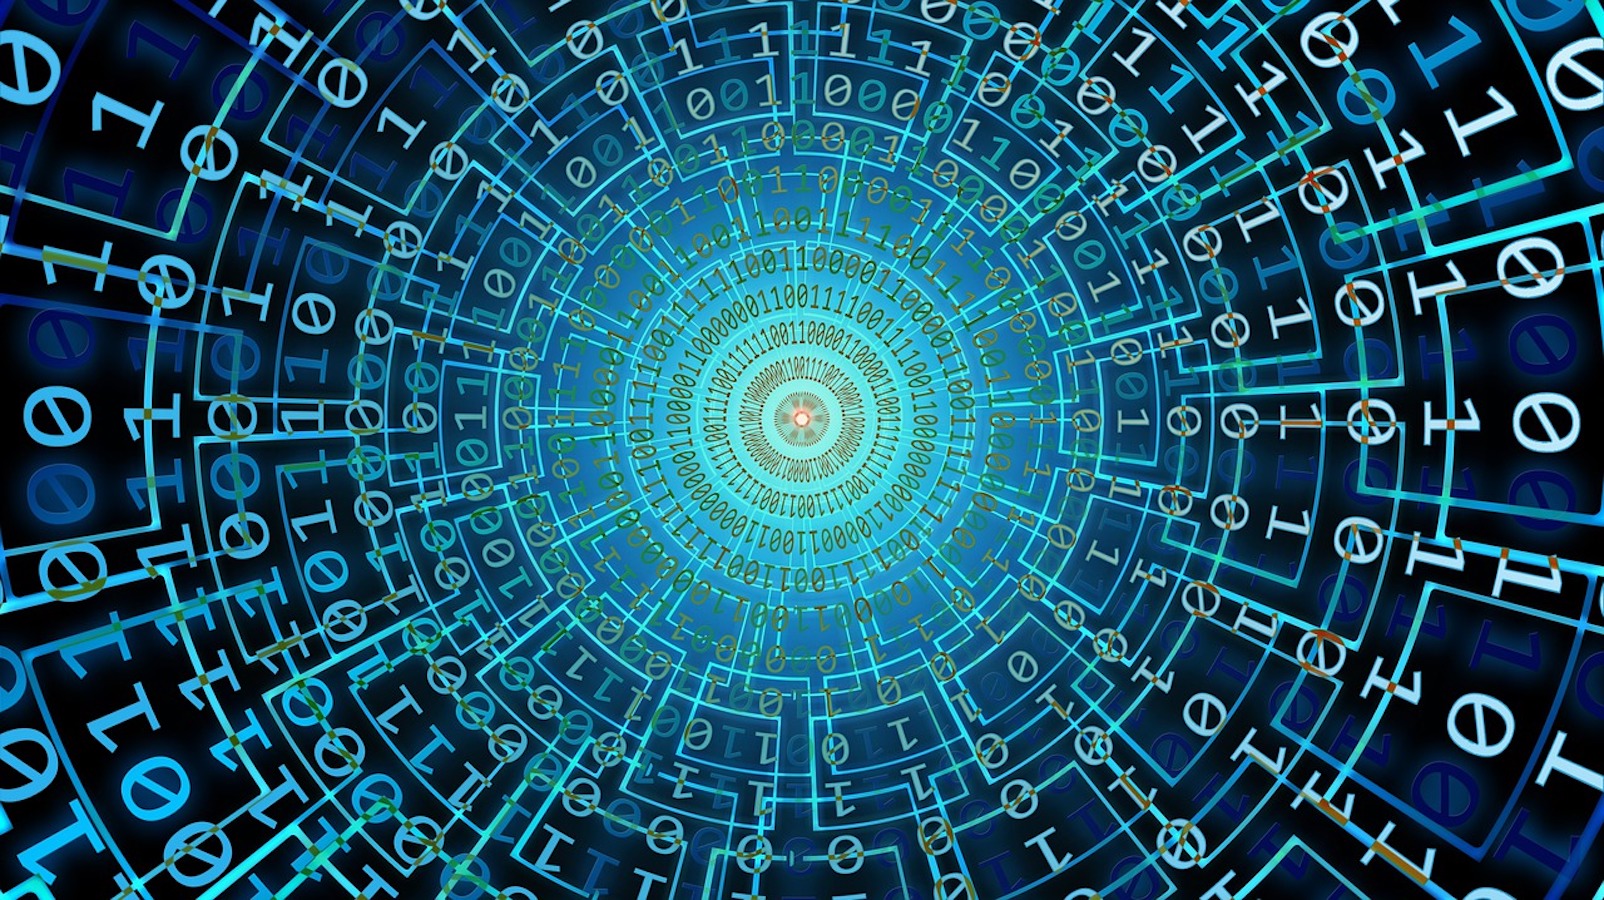 Cyber security image showing a spiral of binary numbers